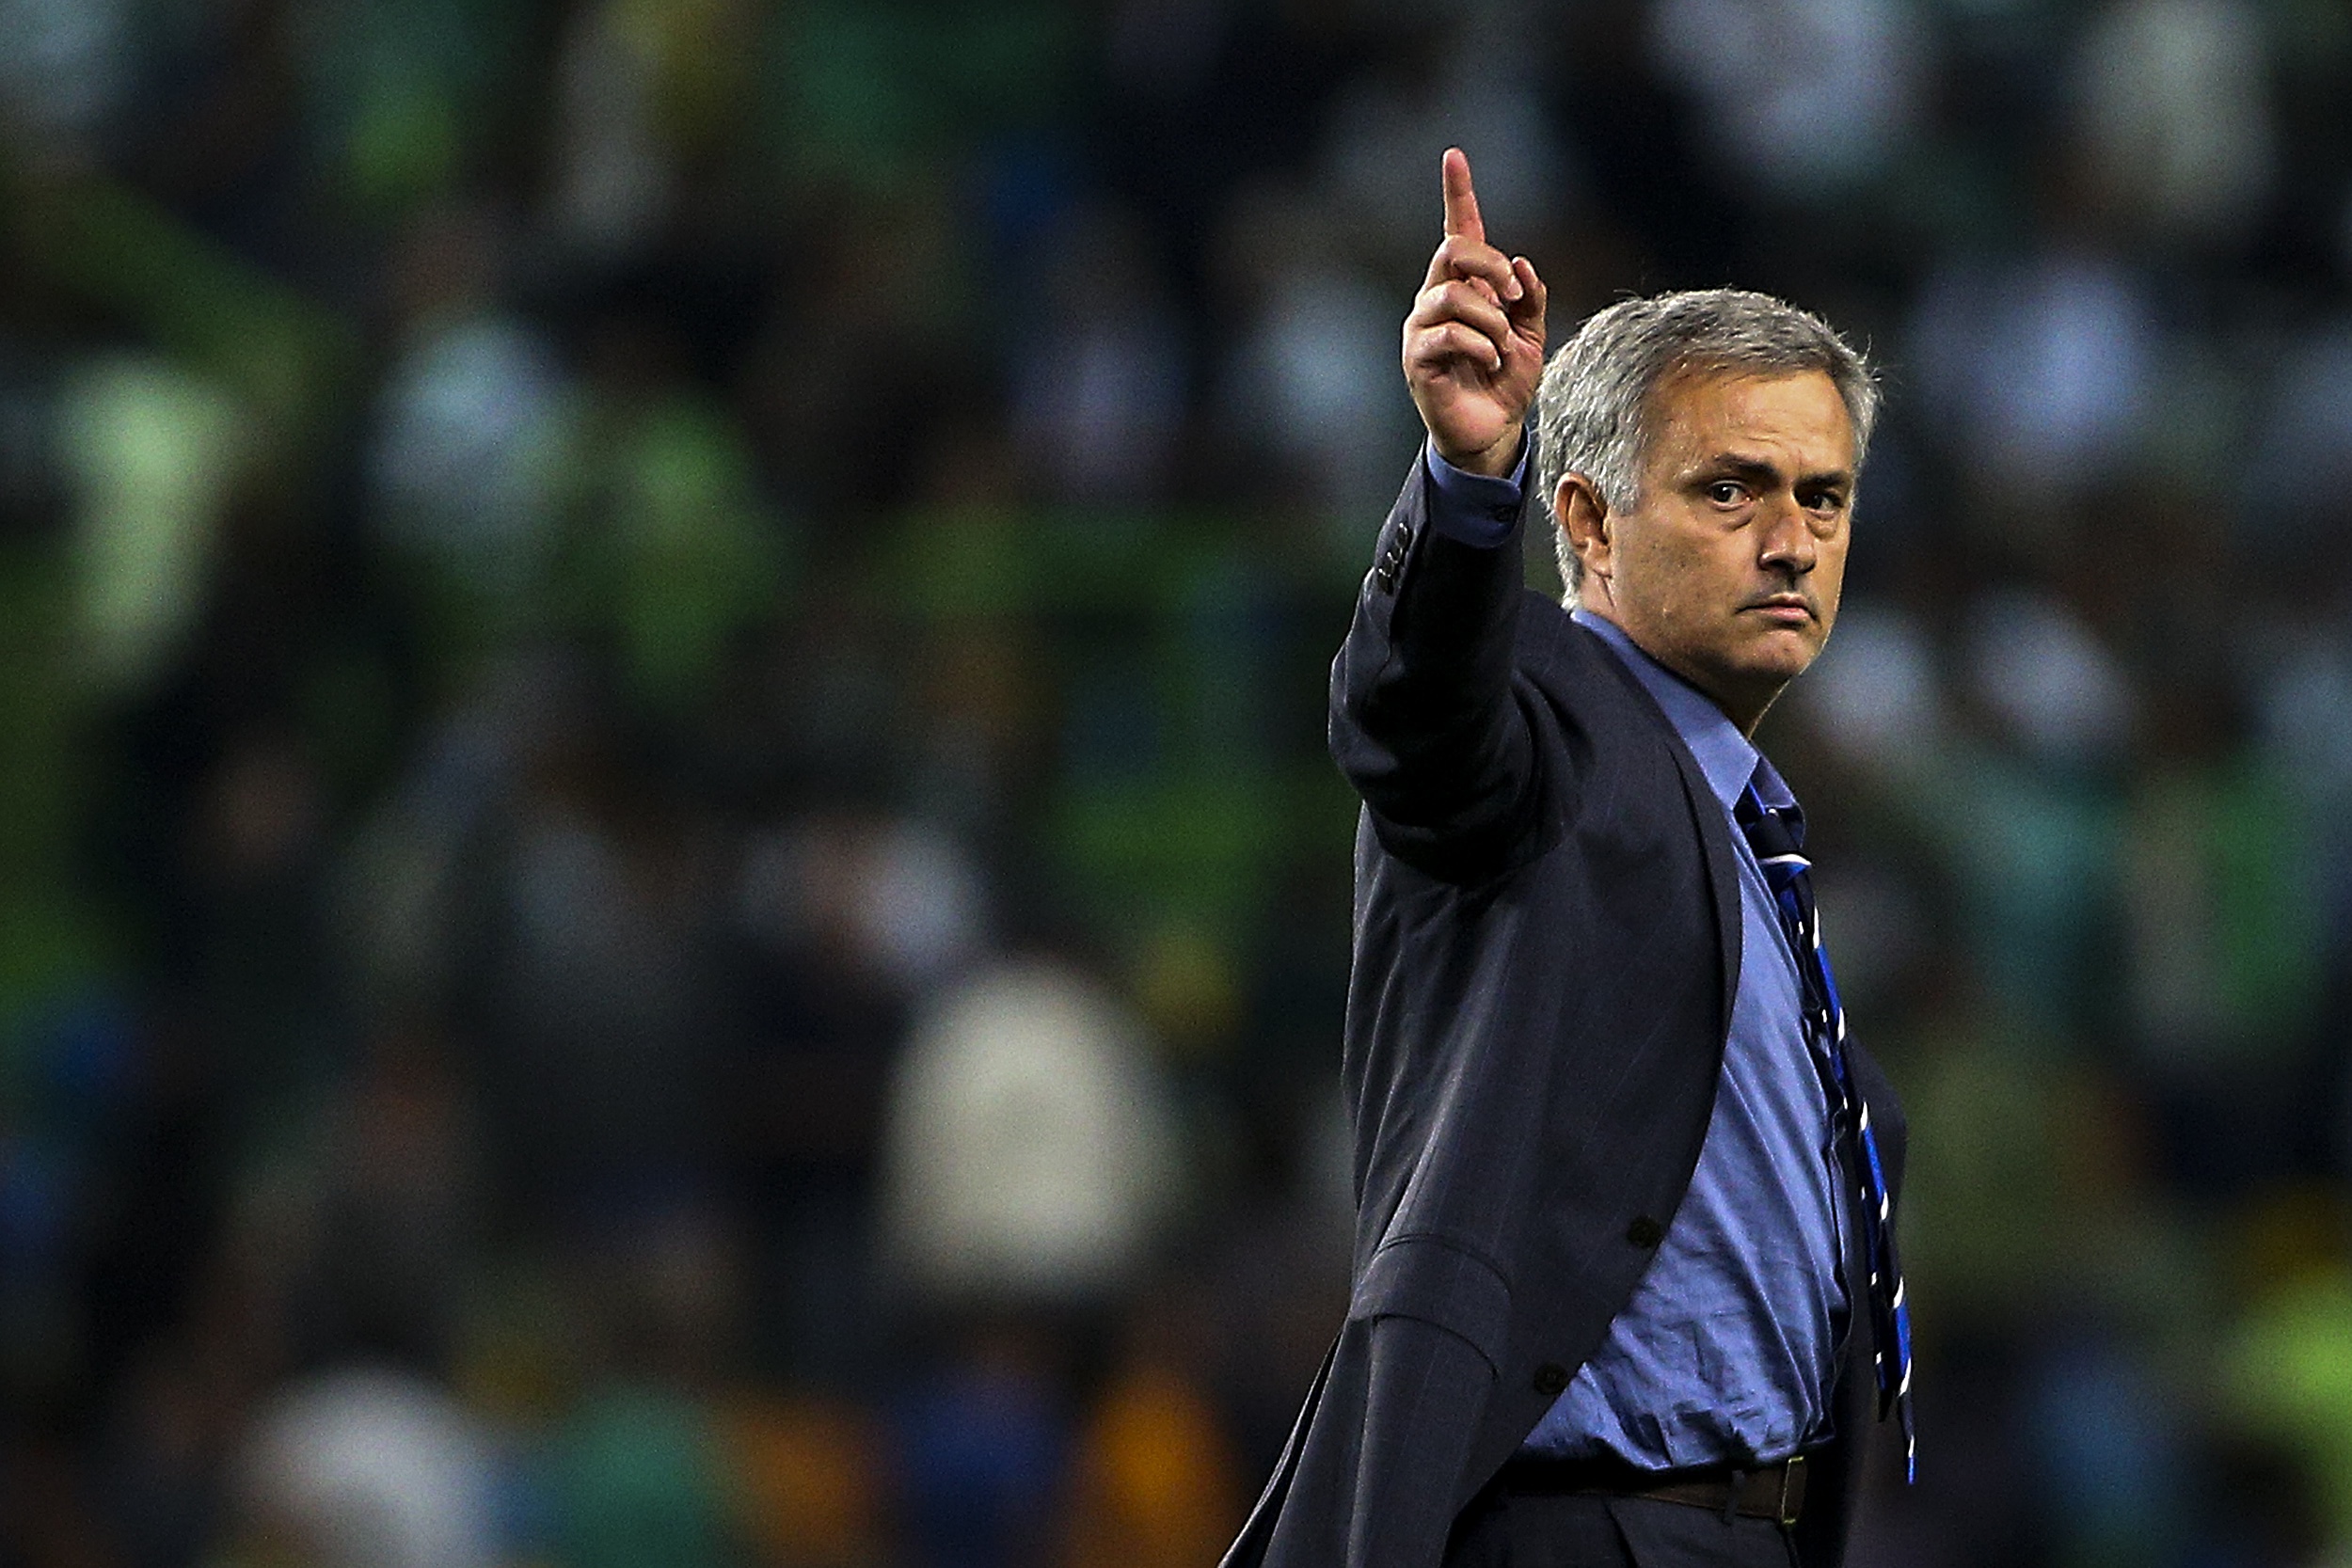 José Mourinho said despite the win over Sporting, Chelsea are not yet in a comfortable position